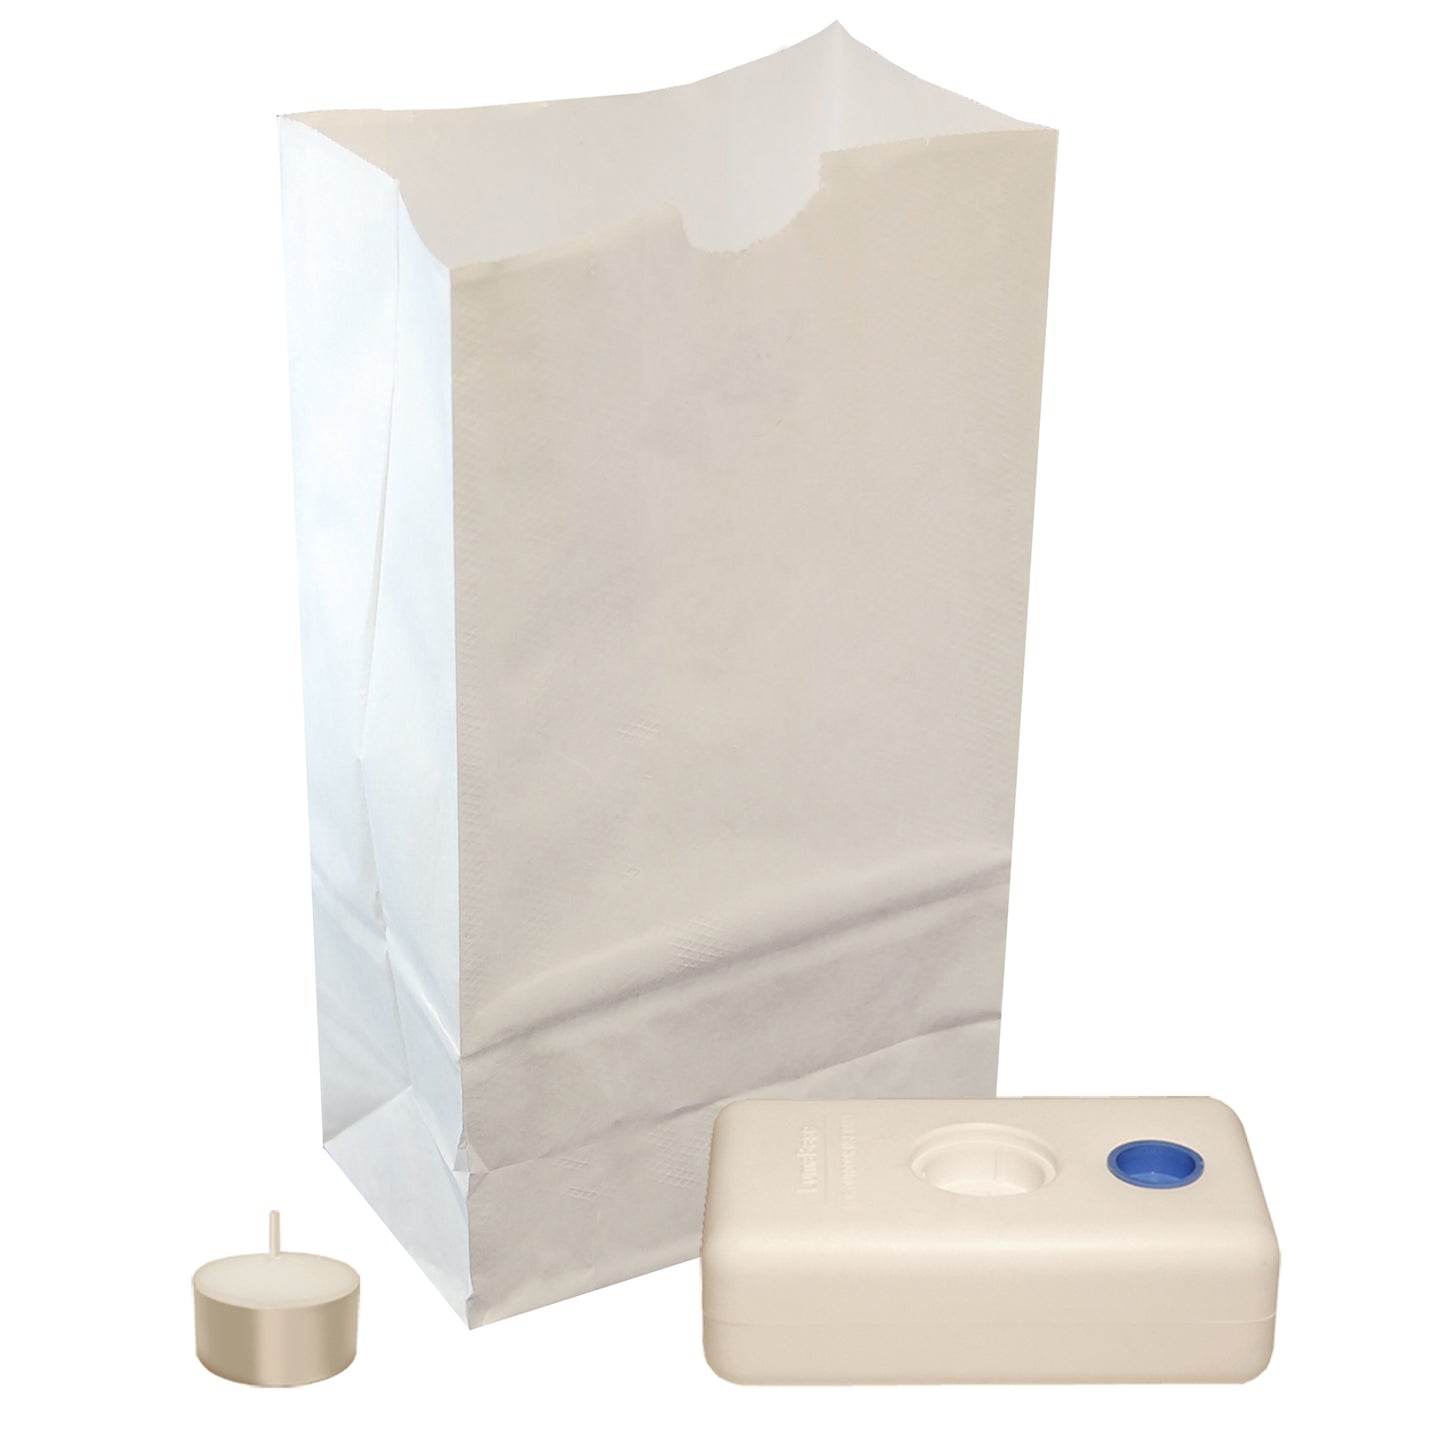 Luminaria Kit - Paper Bags, Tea Light Candles and LumaBases - Set of 100